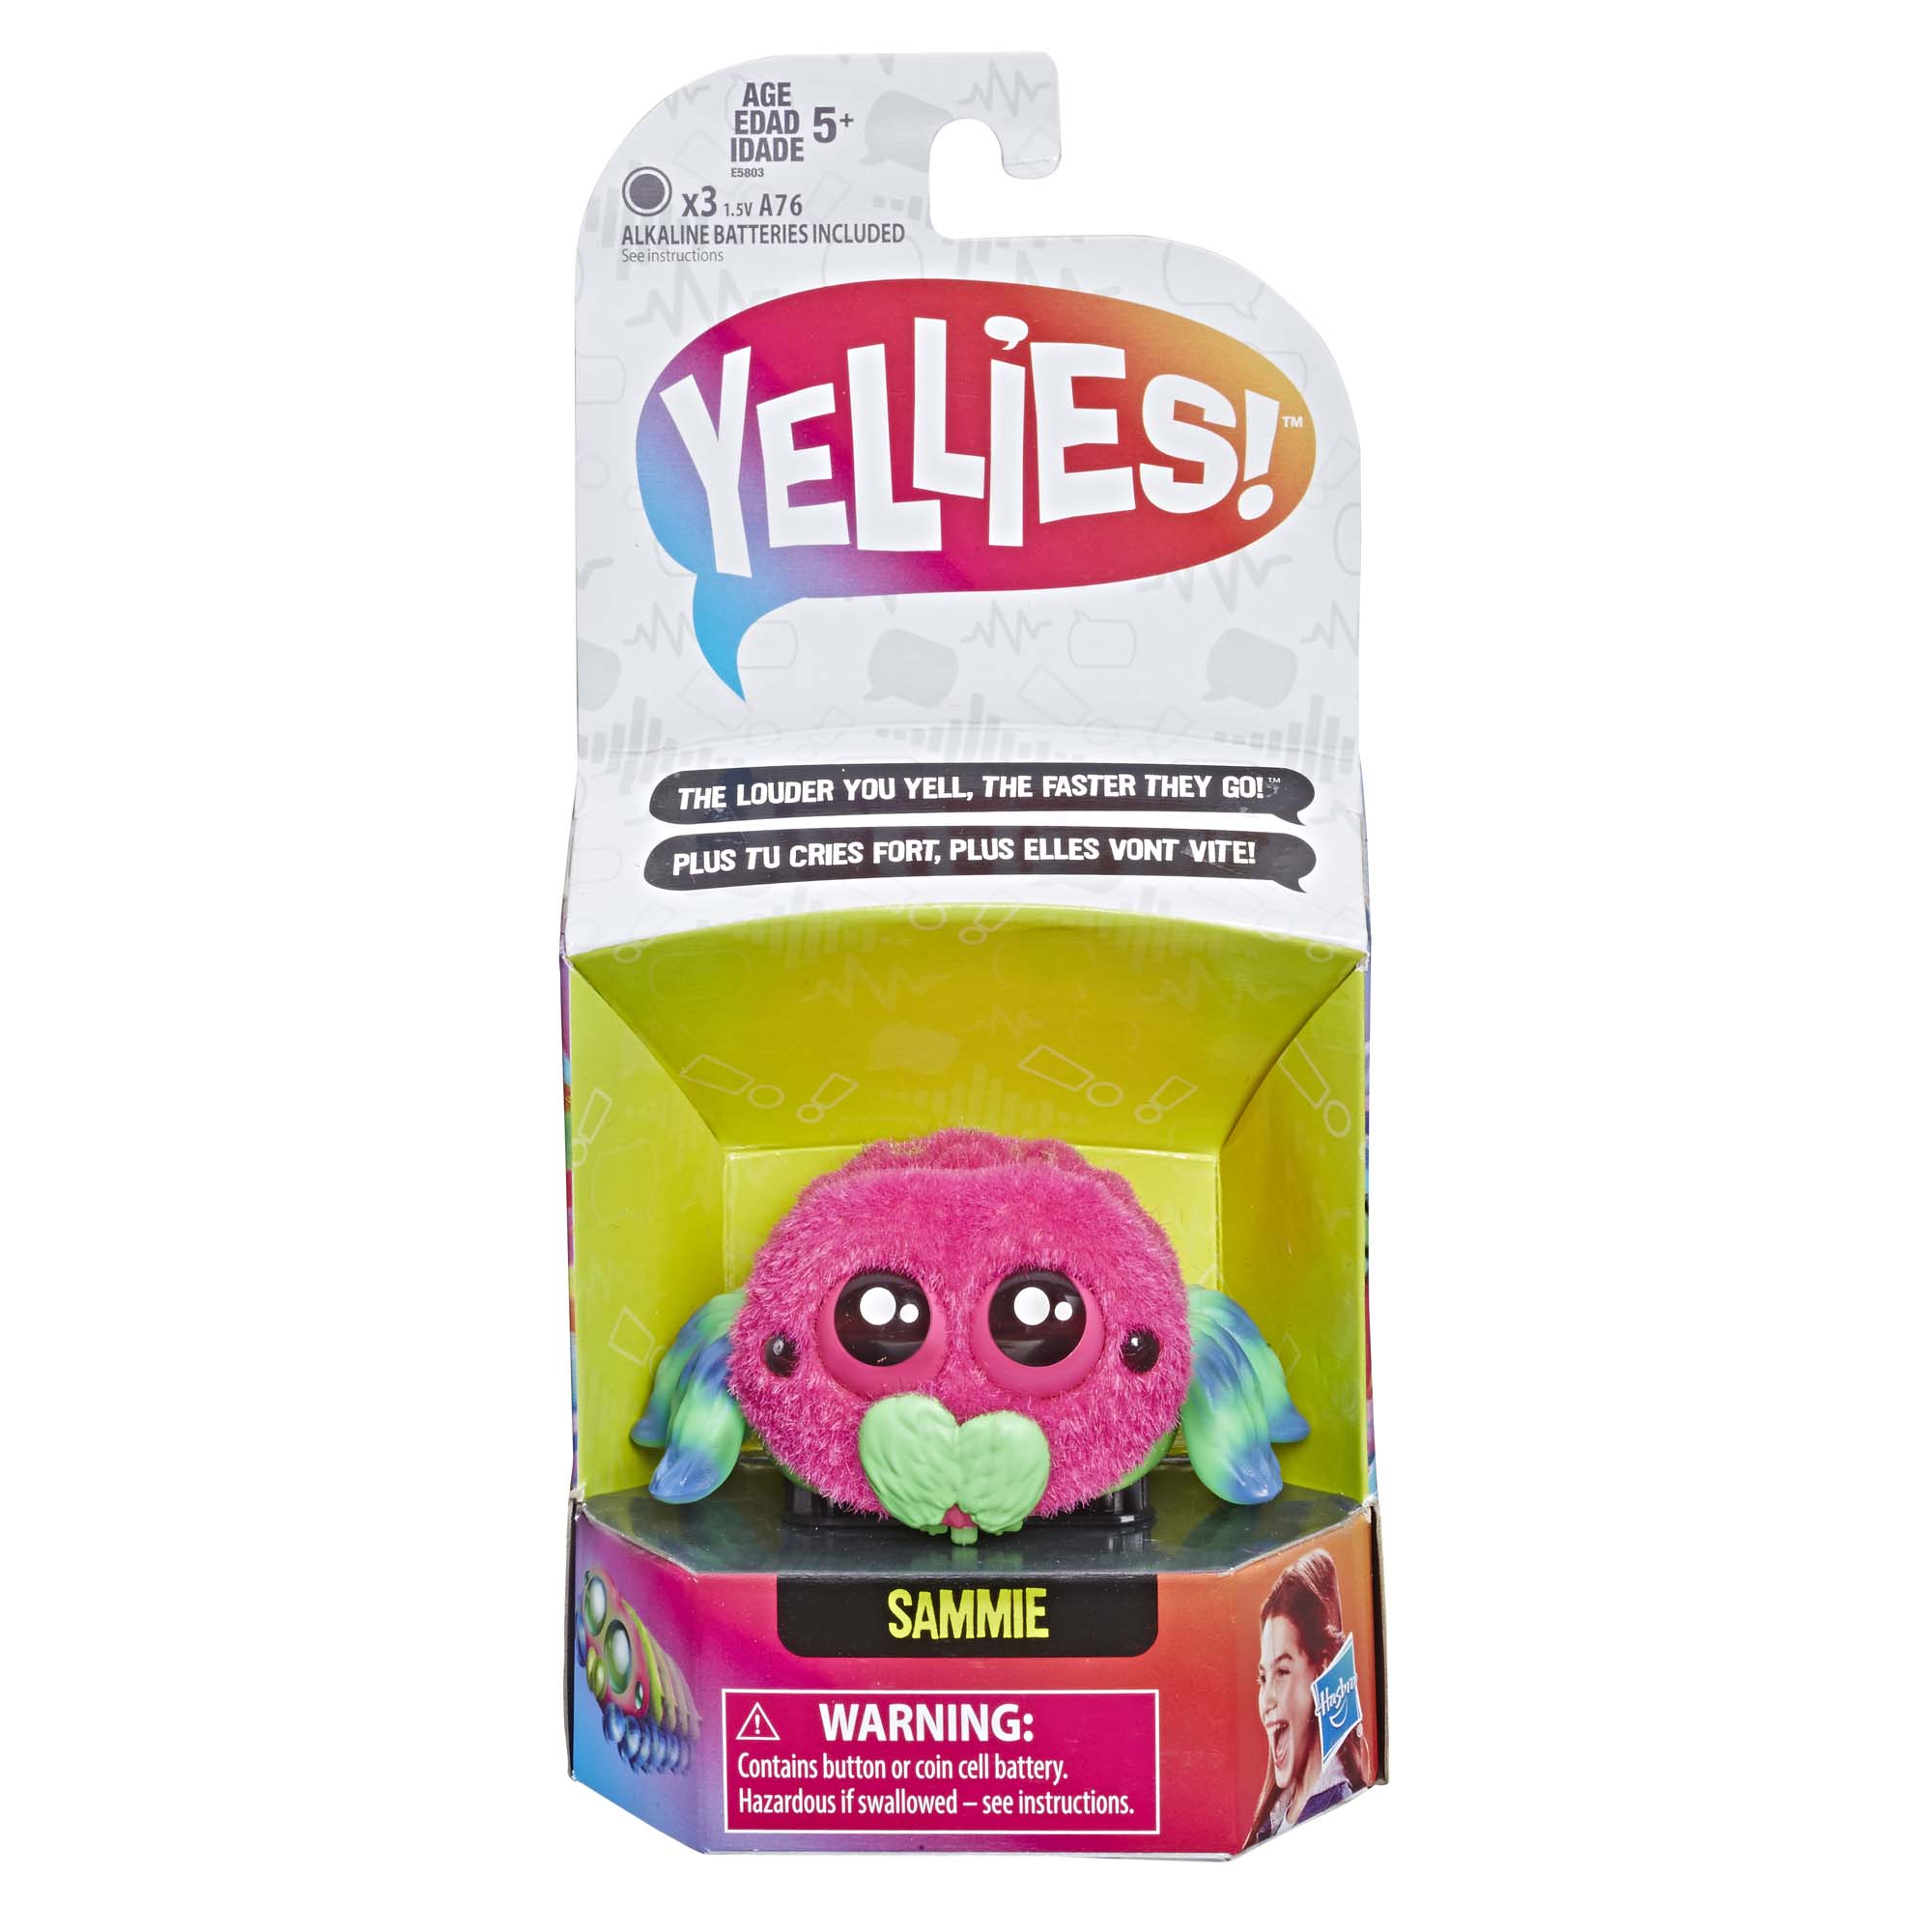 Yellies! Sammie; Voice-Activated Spider Pet; Ages 5 and up - image 2 of 2